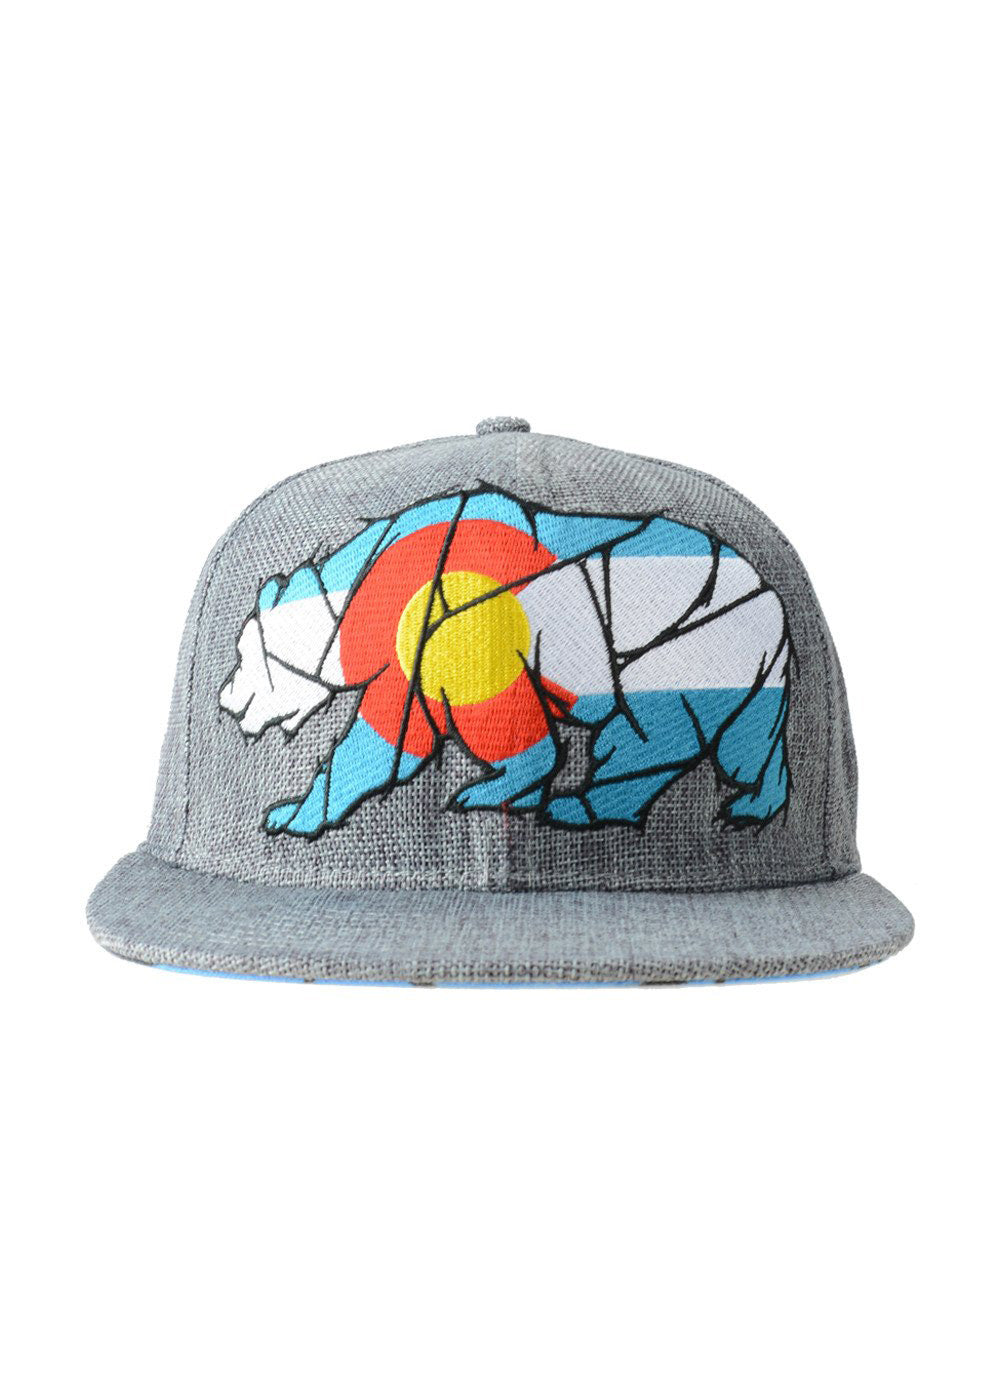 Grassroots Colorado Mosaic Bear Fitted Hat